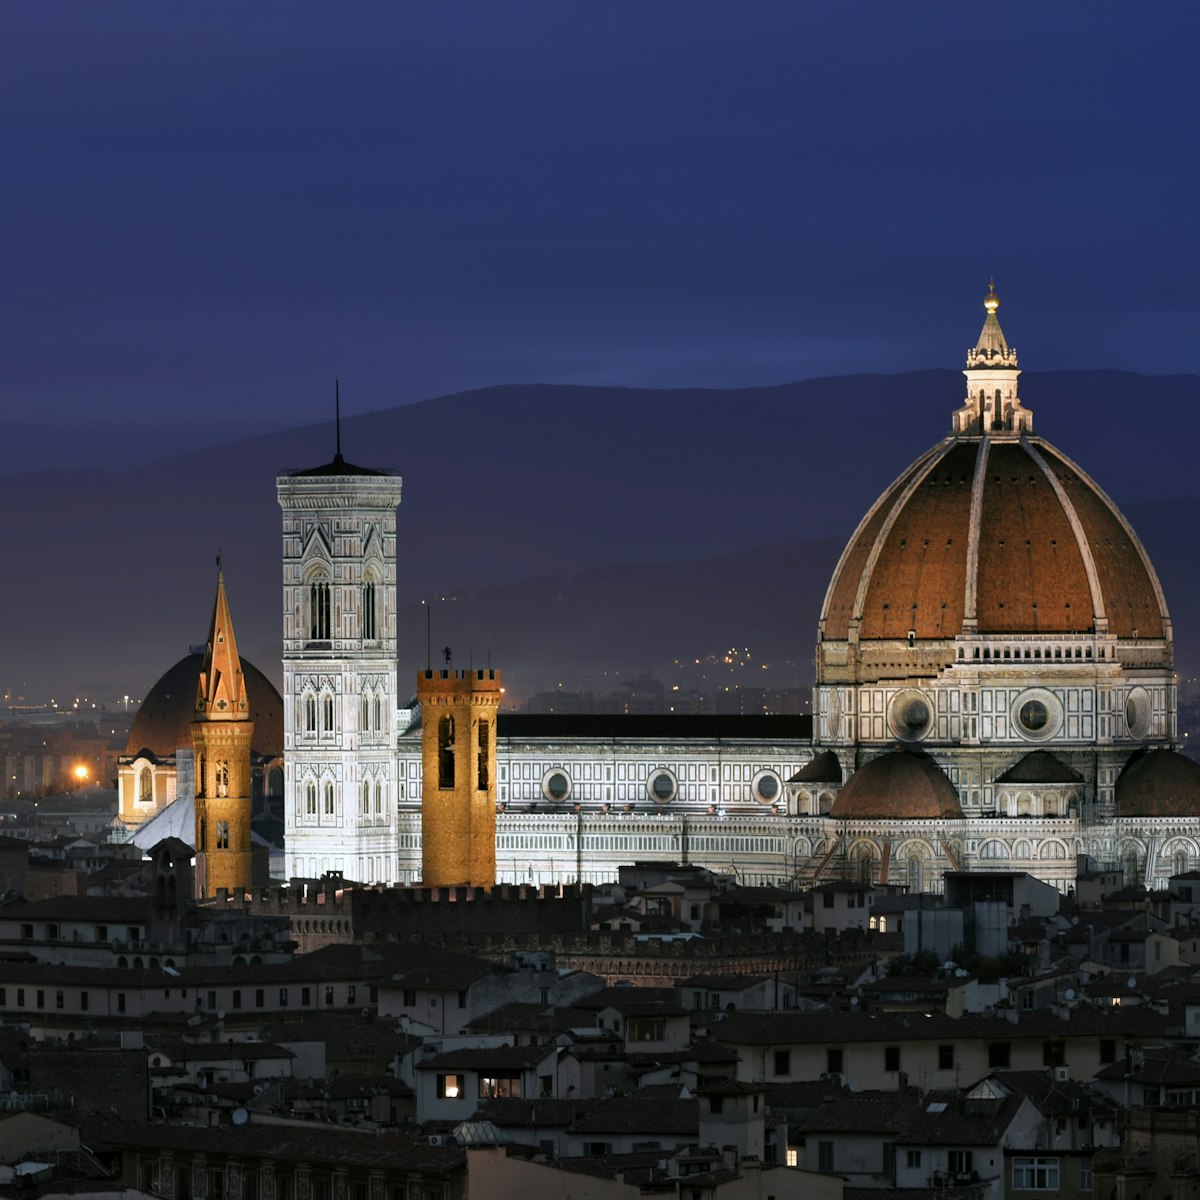 500px Photo ID: 95945455 - Cathedral of Florence Italy, At Night from the Michelangelo's Piazza.